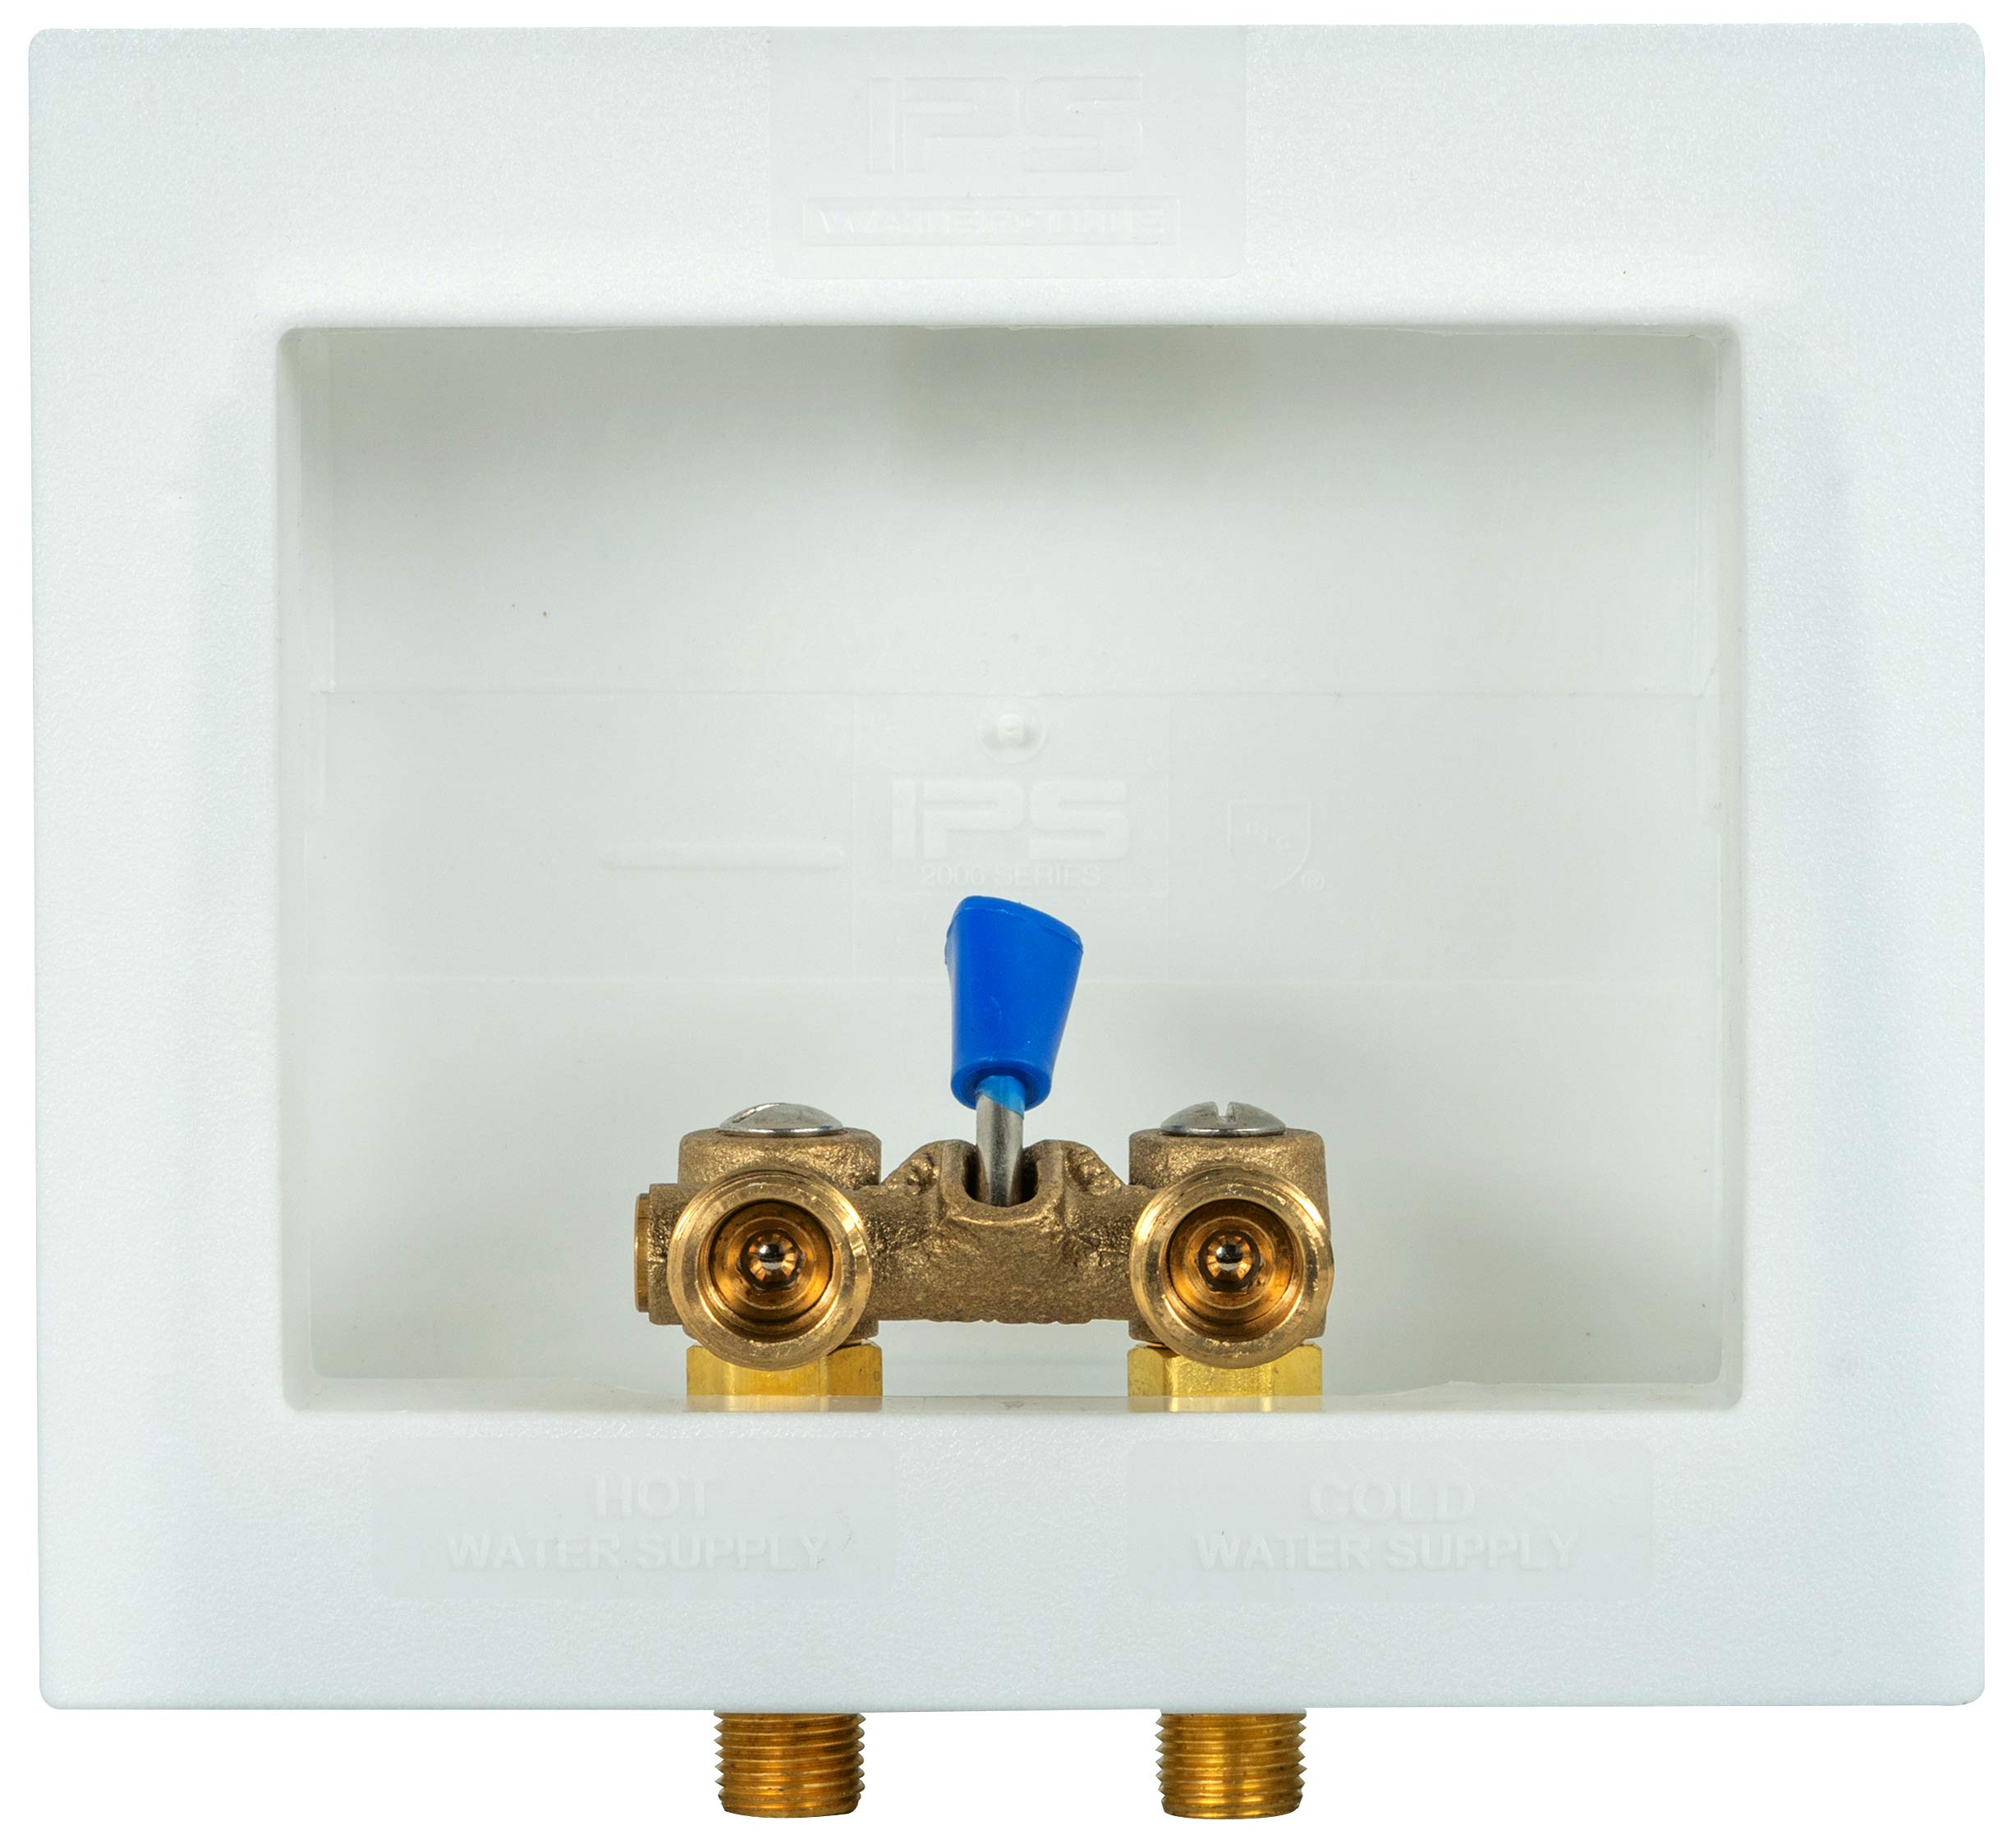 Water-Tite 85630 DU-ALL Dual-Drain Washing Machine Outlet Box - Single-Lever Valve Installed, 1/2" Sweat Connection, White Plastic